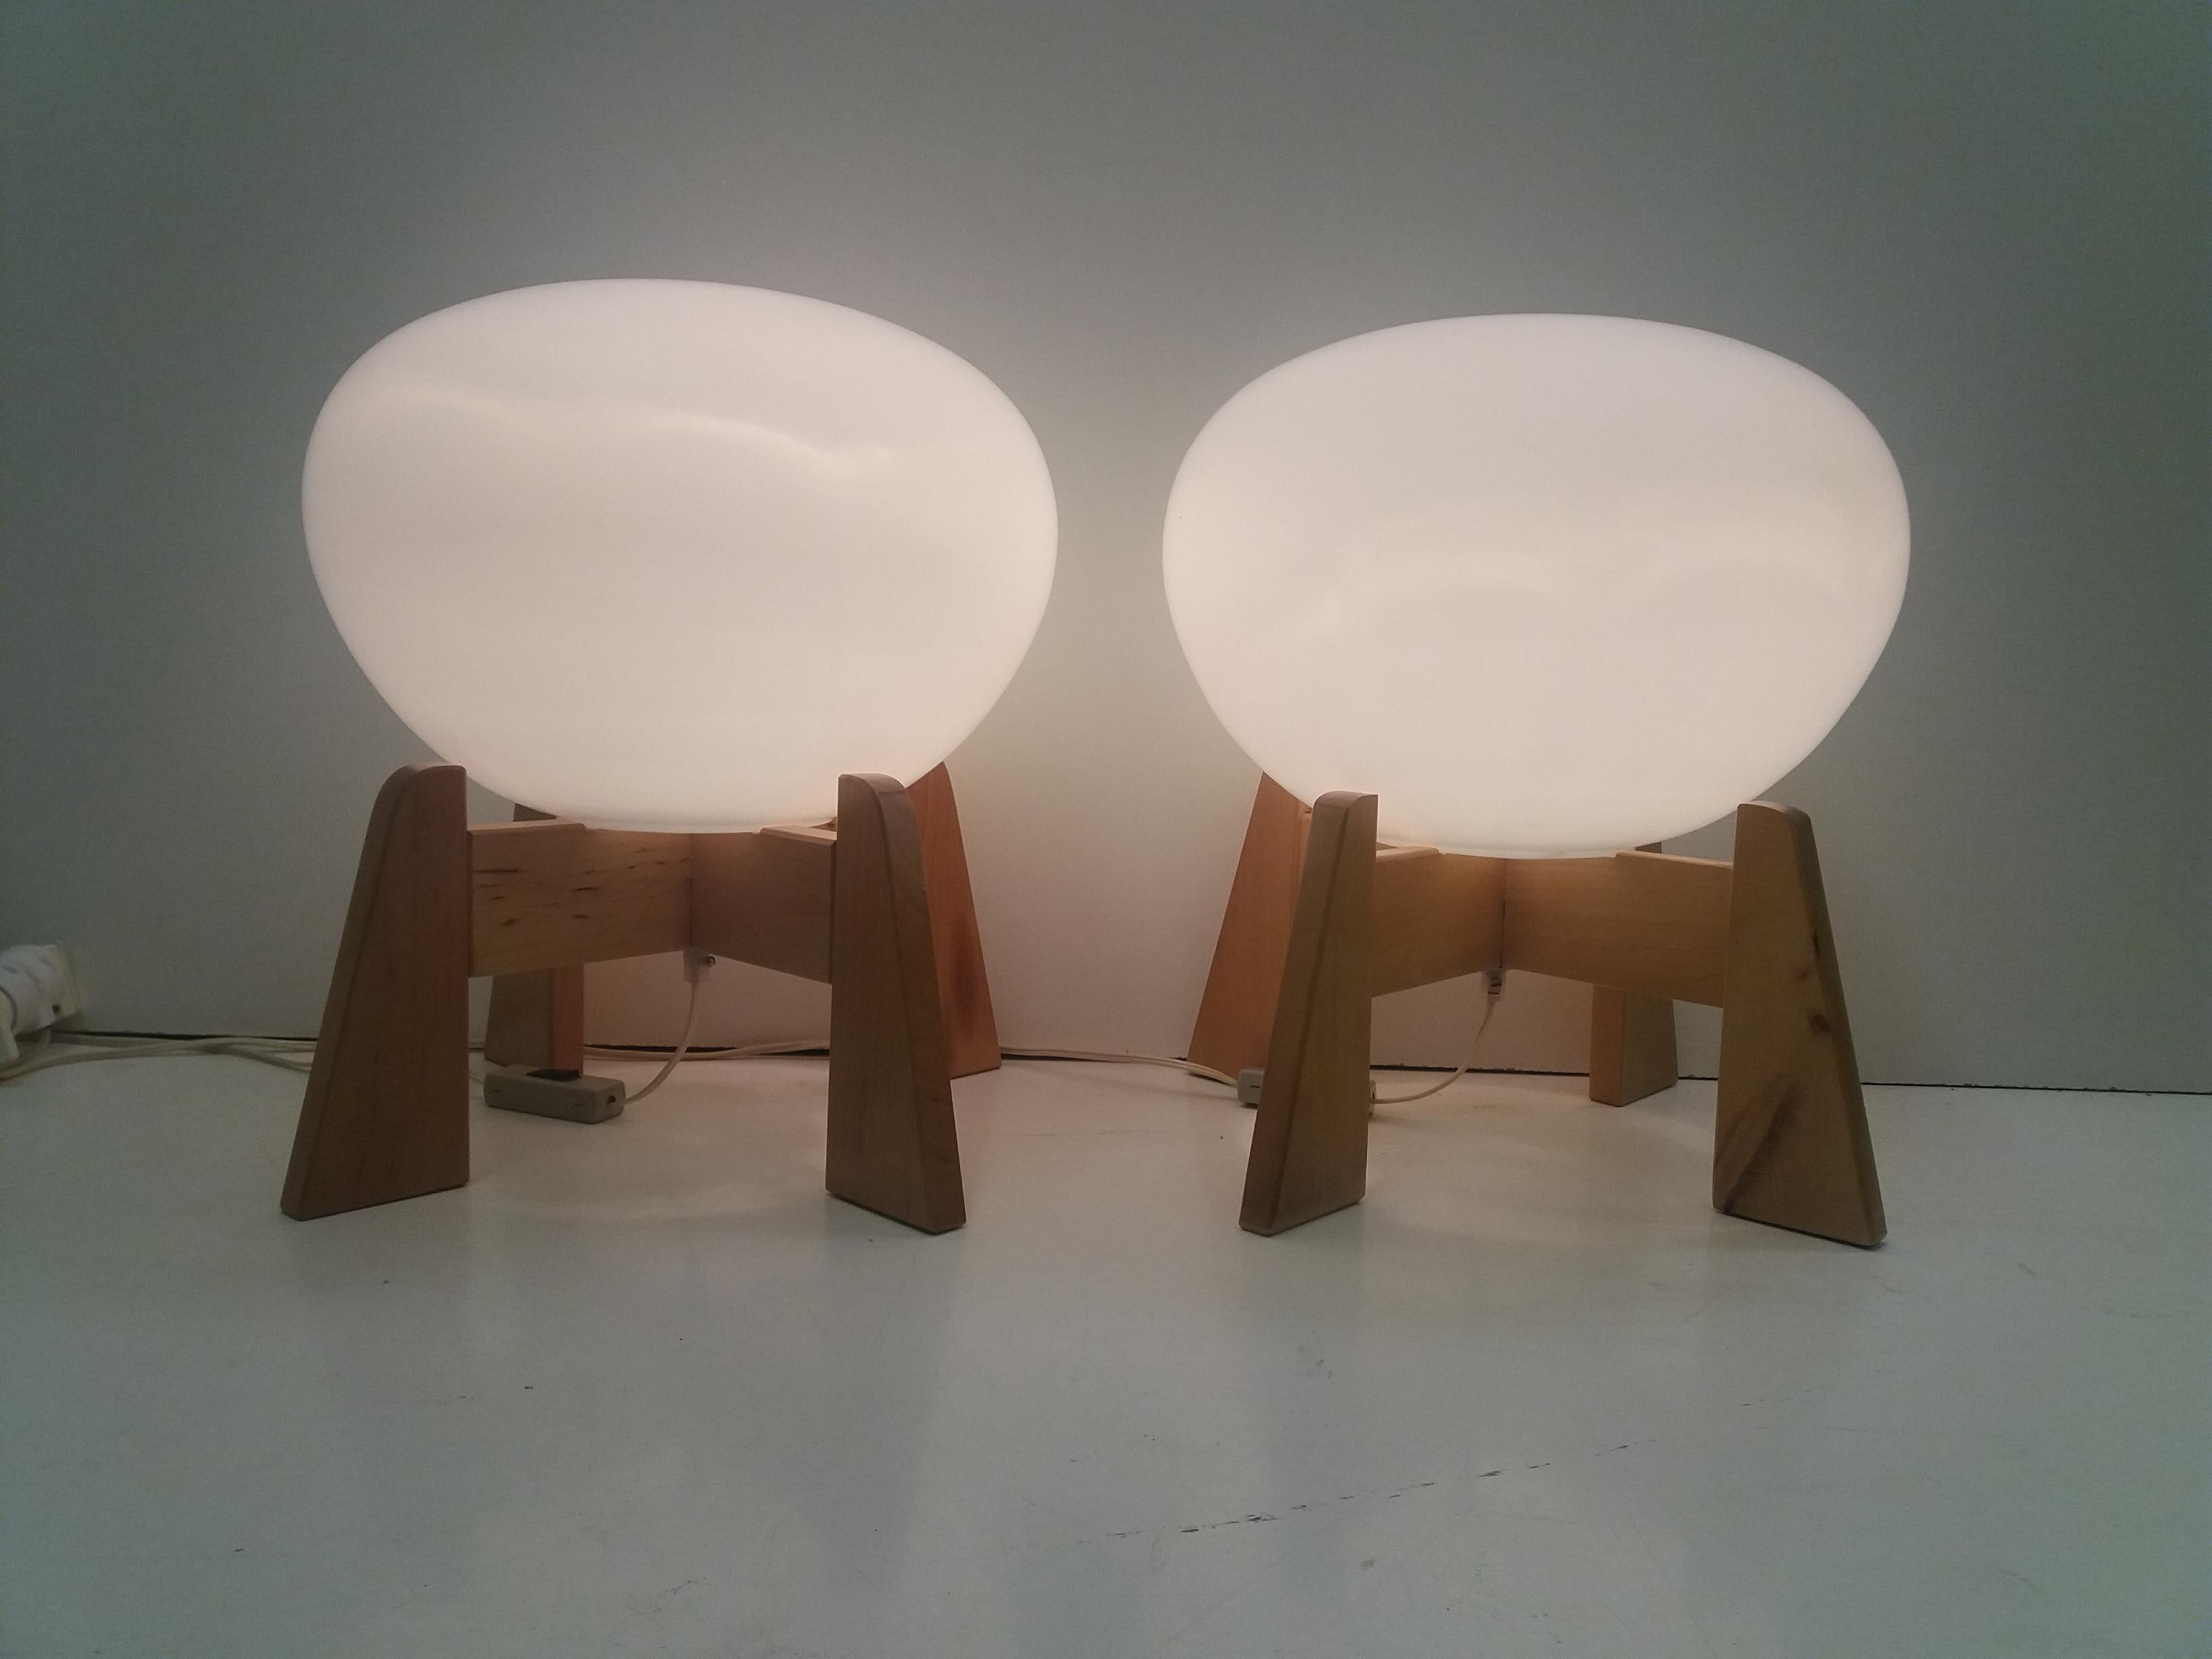 - 2 Pieces of design wooden lamps
- Good original condition
- Wood base, white frosted opal glass shade
- Production - Headquarters of Folk Art production ULUV.